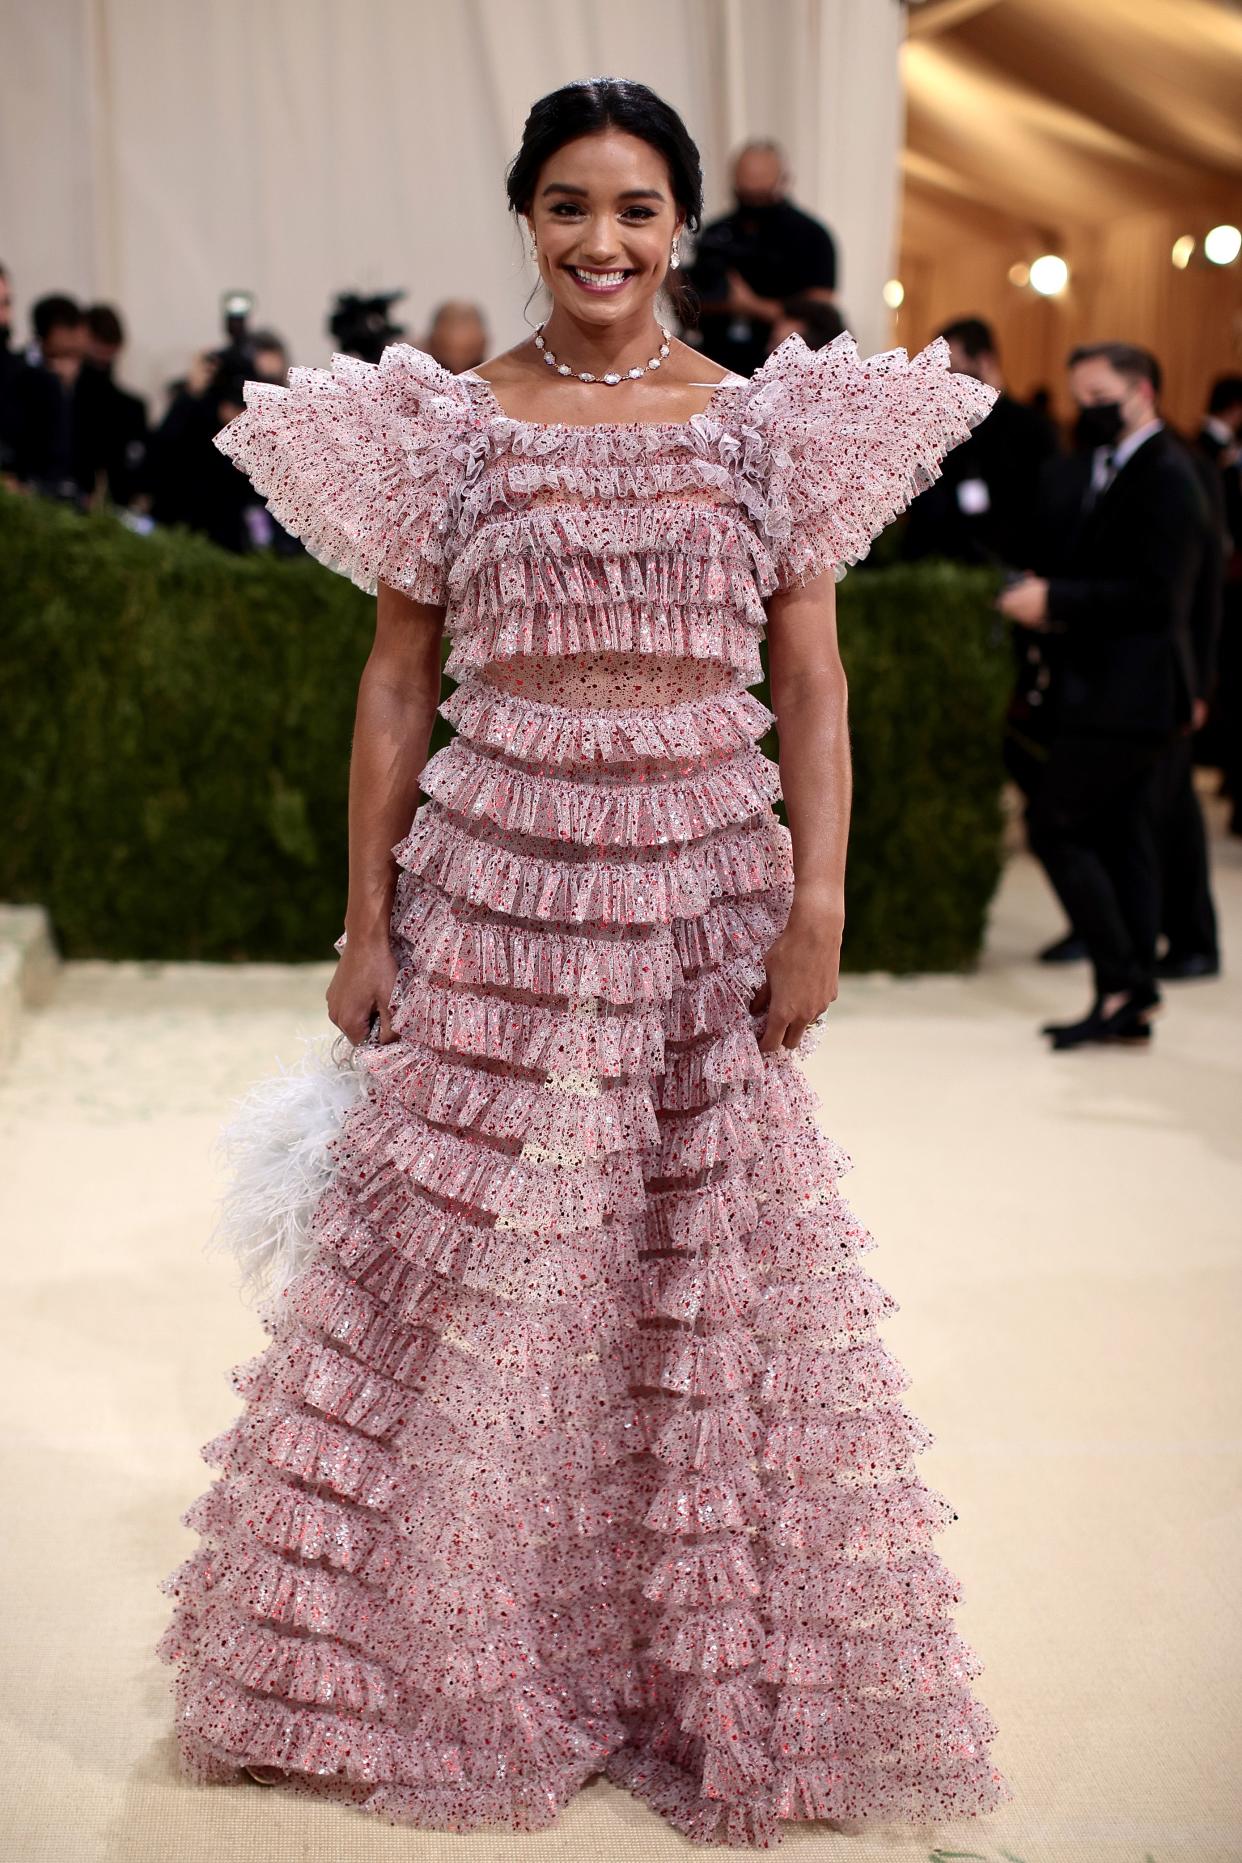 Host Rachel Smith attends The 2021 Met Gala Celebrating In America: A Lexicon Of Fashion at Metropolitan Museum of Art on Sept. 13, 2021 in New York.